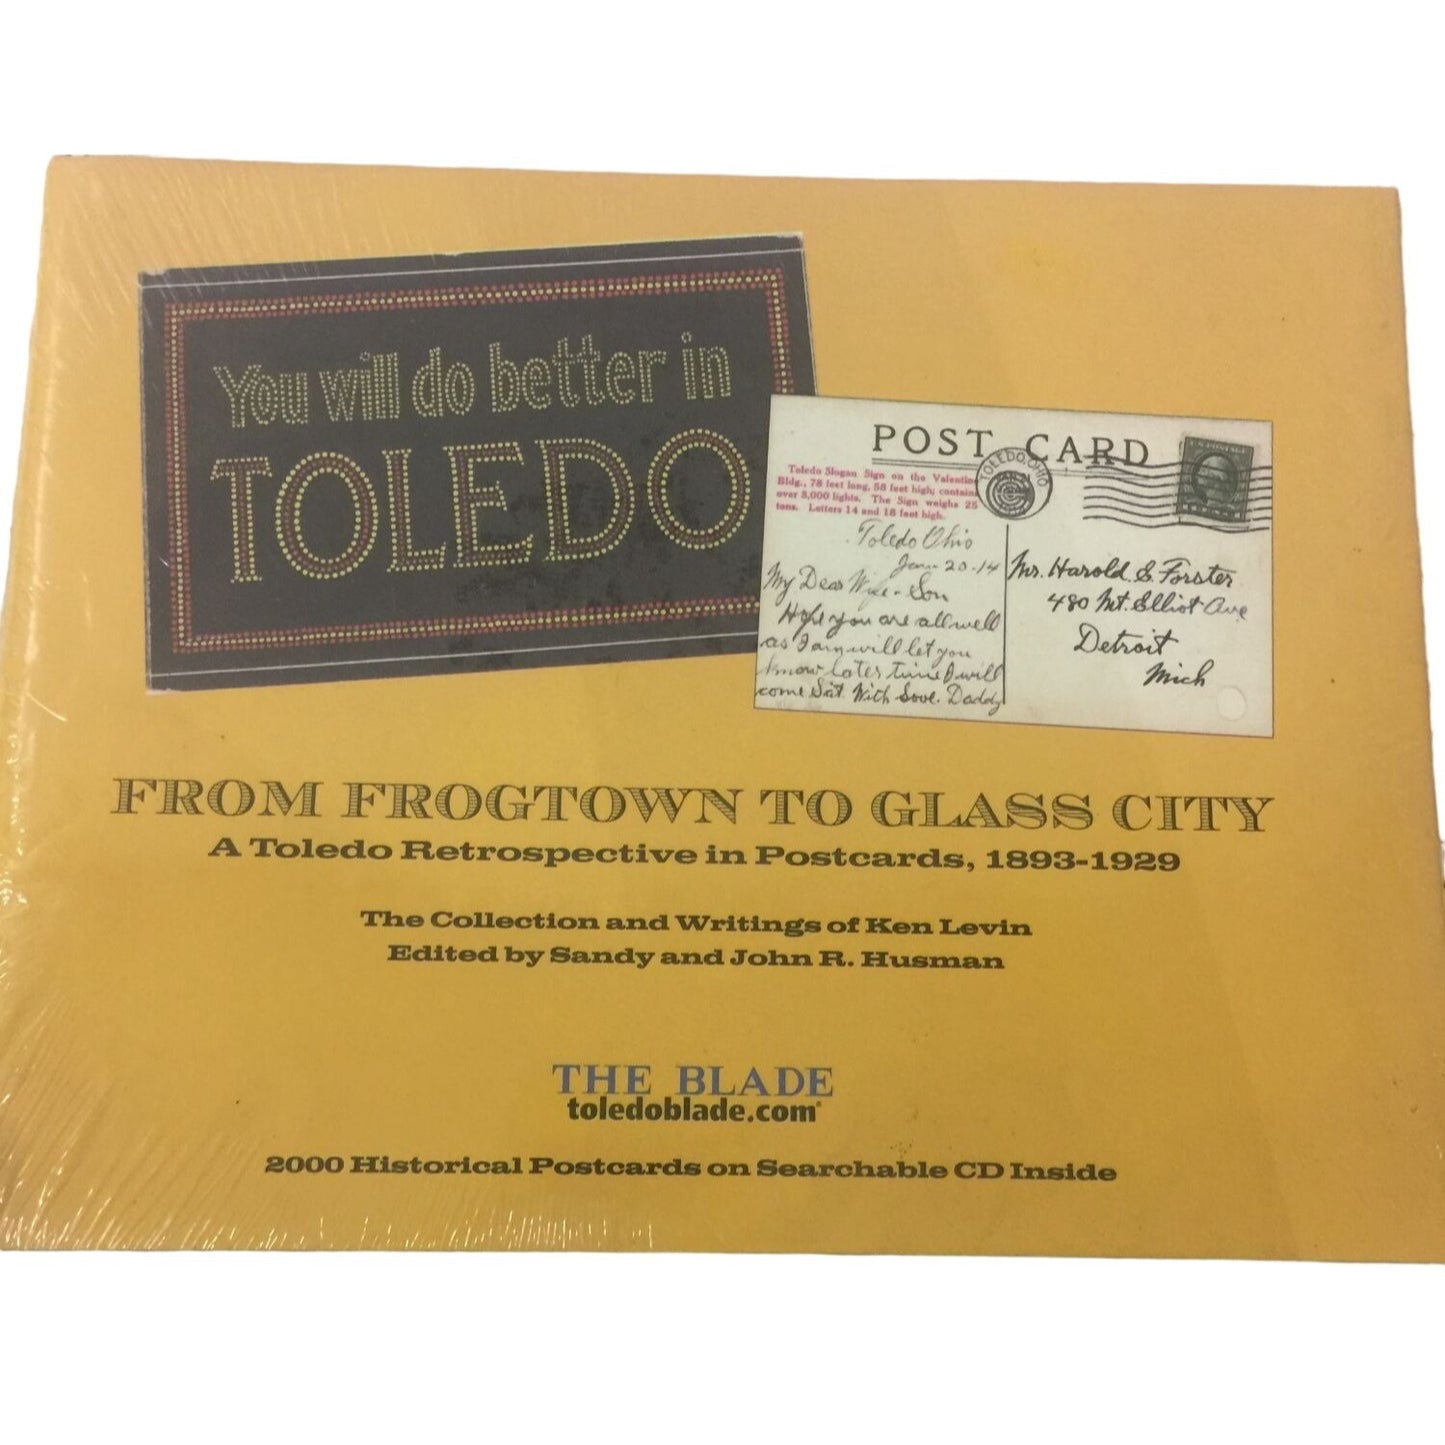 From Frogtown to Glass City A Toledo Retrospective in Postcards 1893-1929